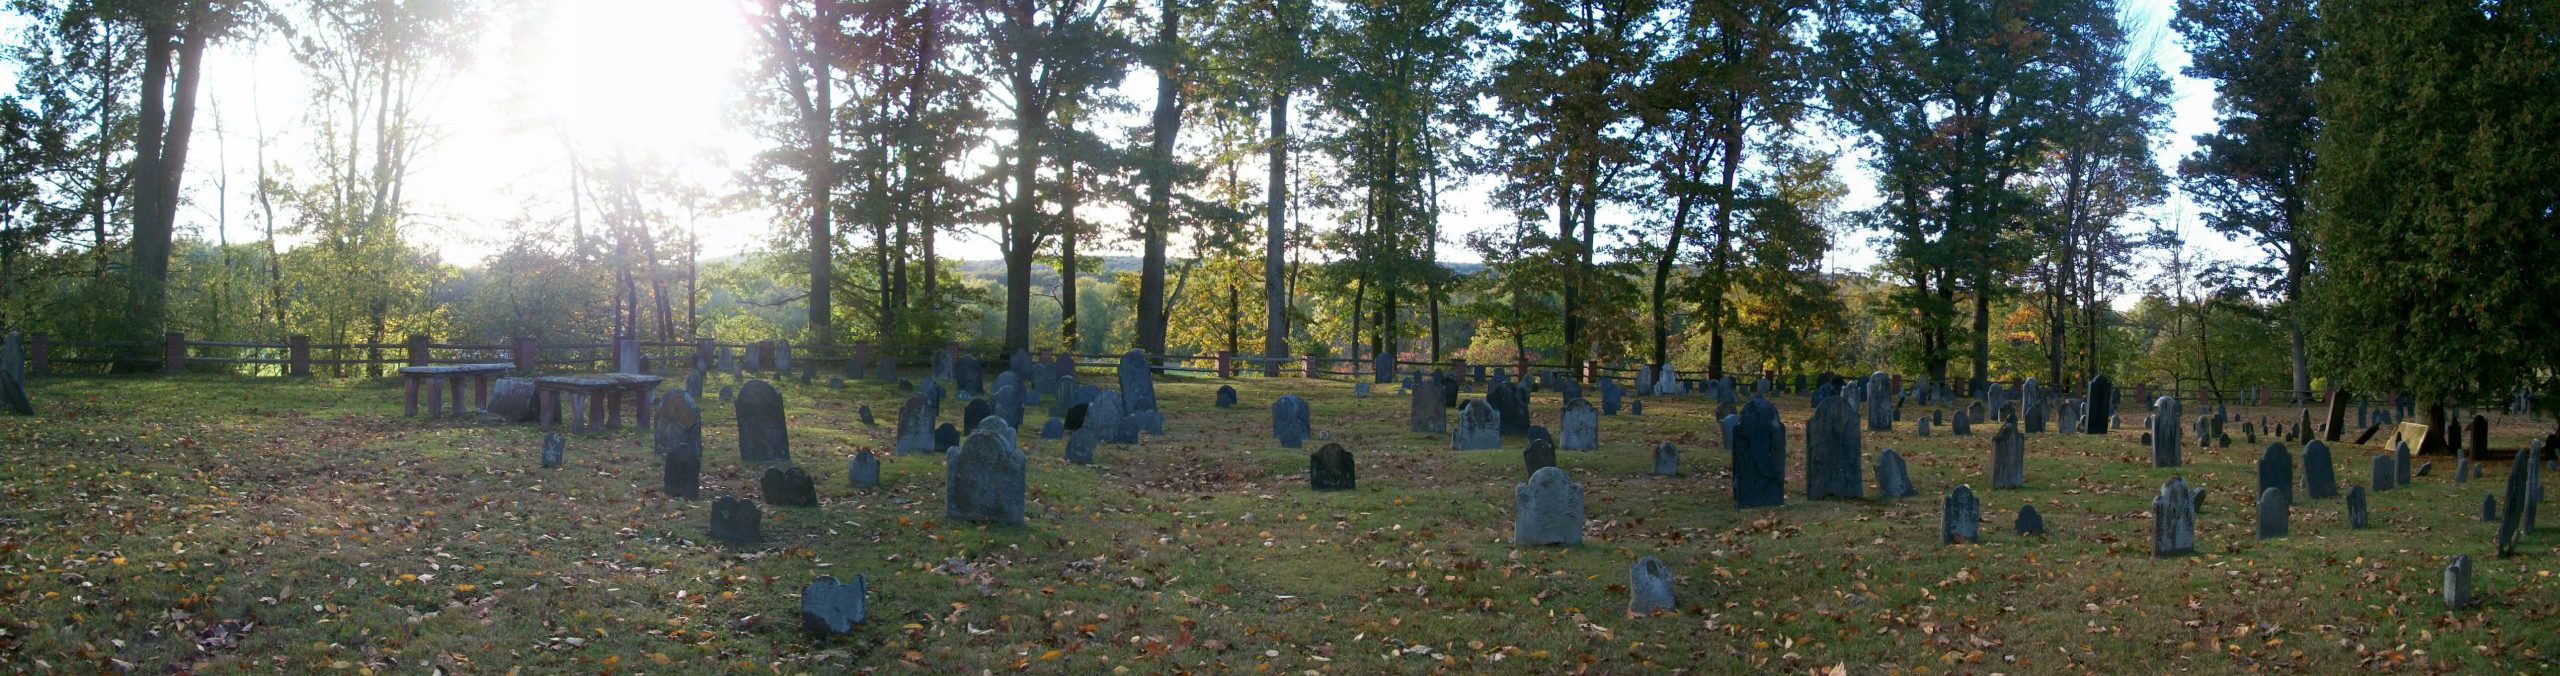 Deerfield Cemetery (user submitted)